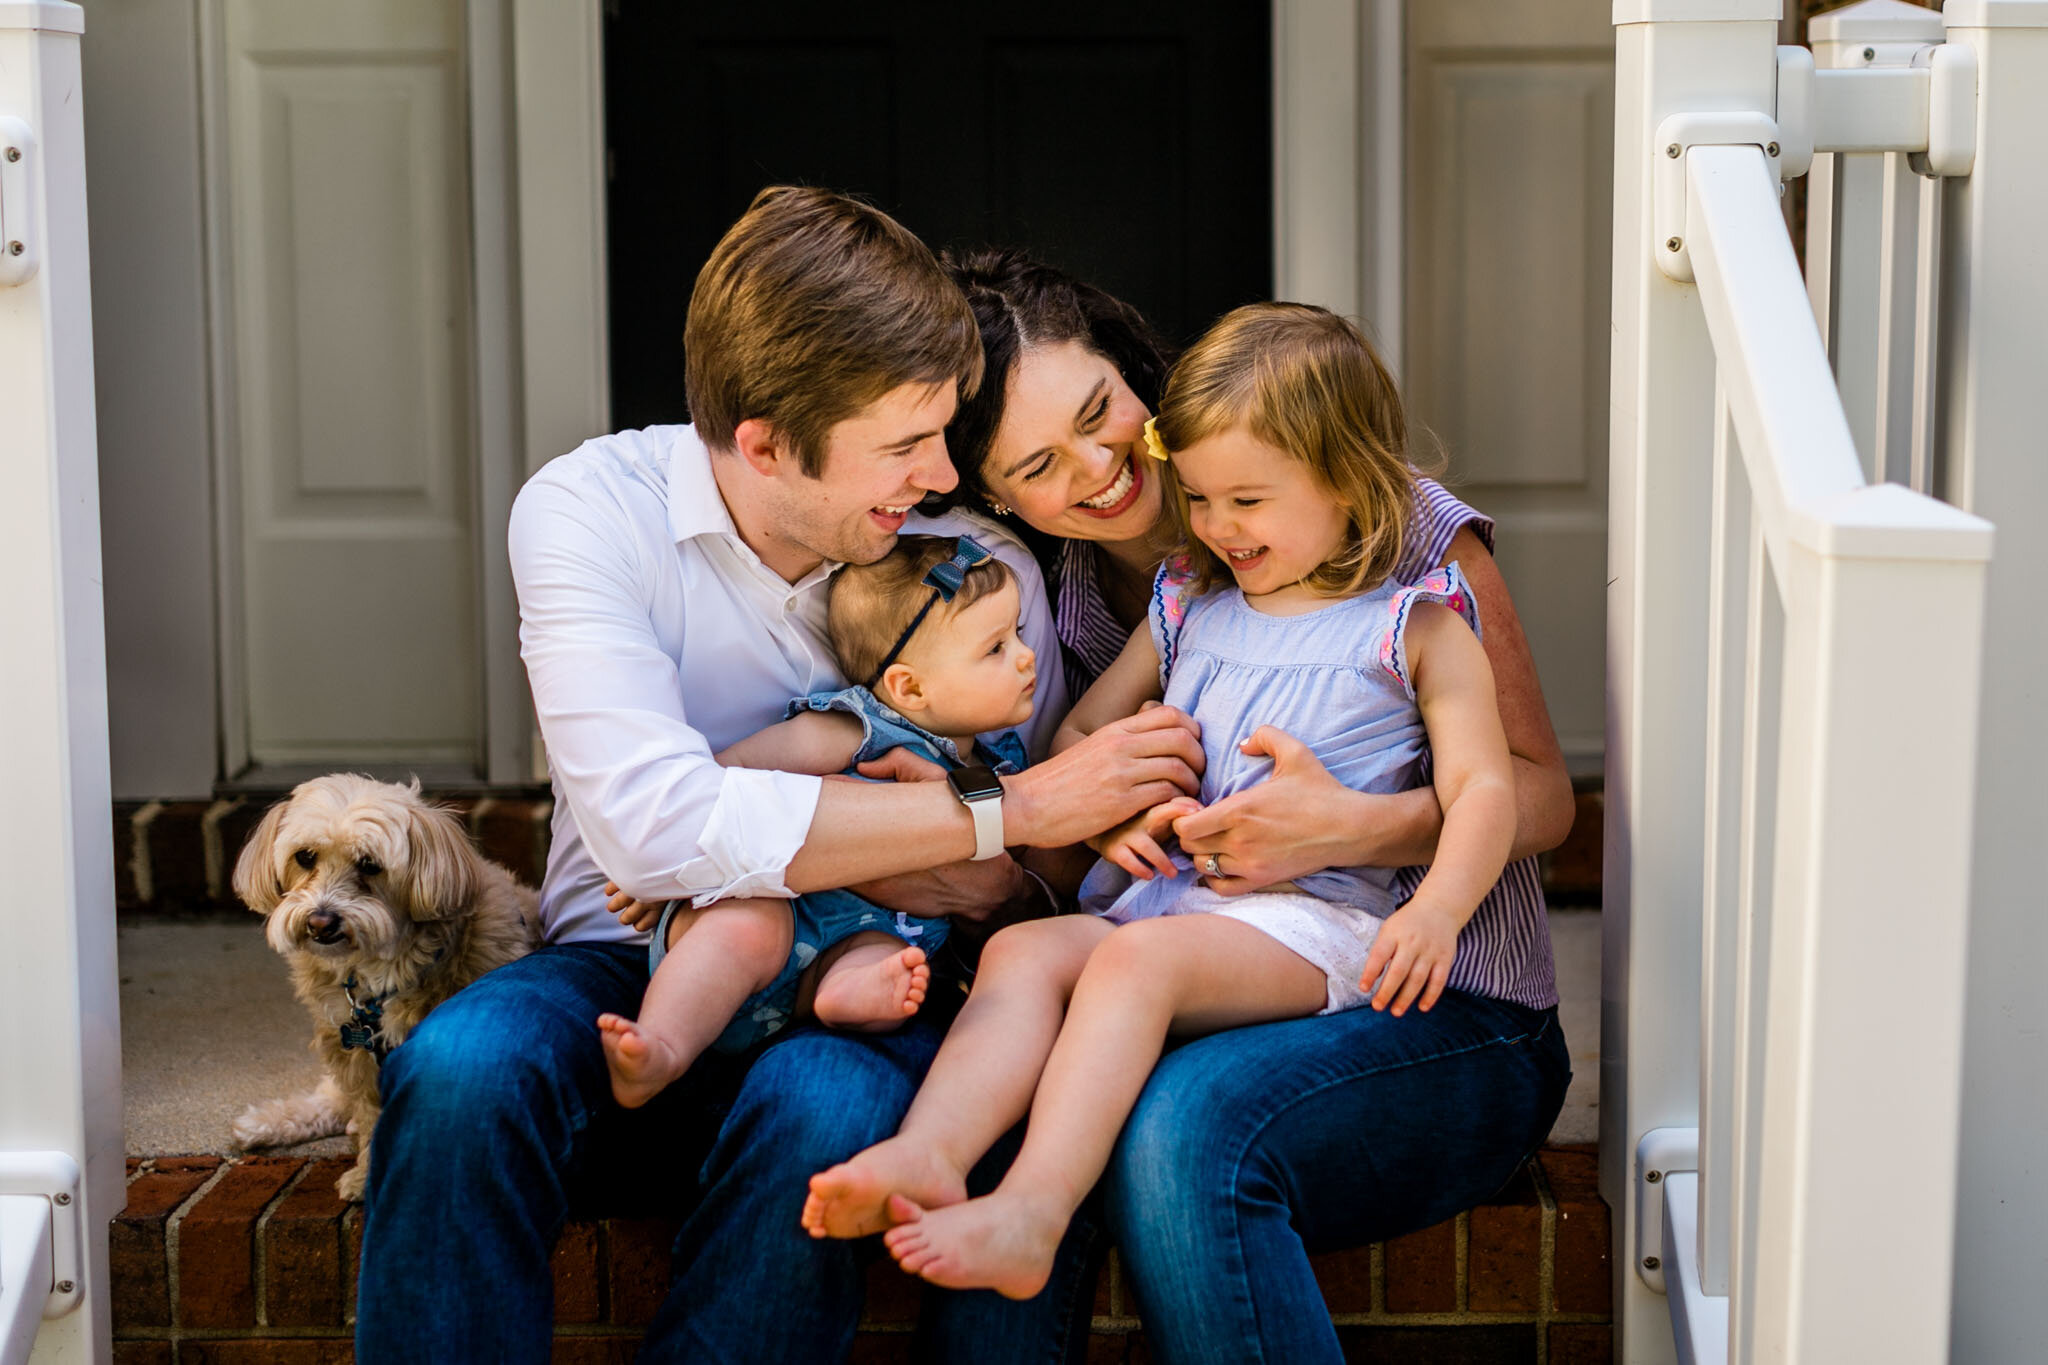 Raleigh Family Photographer | By G. Lin Photography | Porch portrait of family tickling daughter